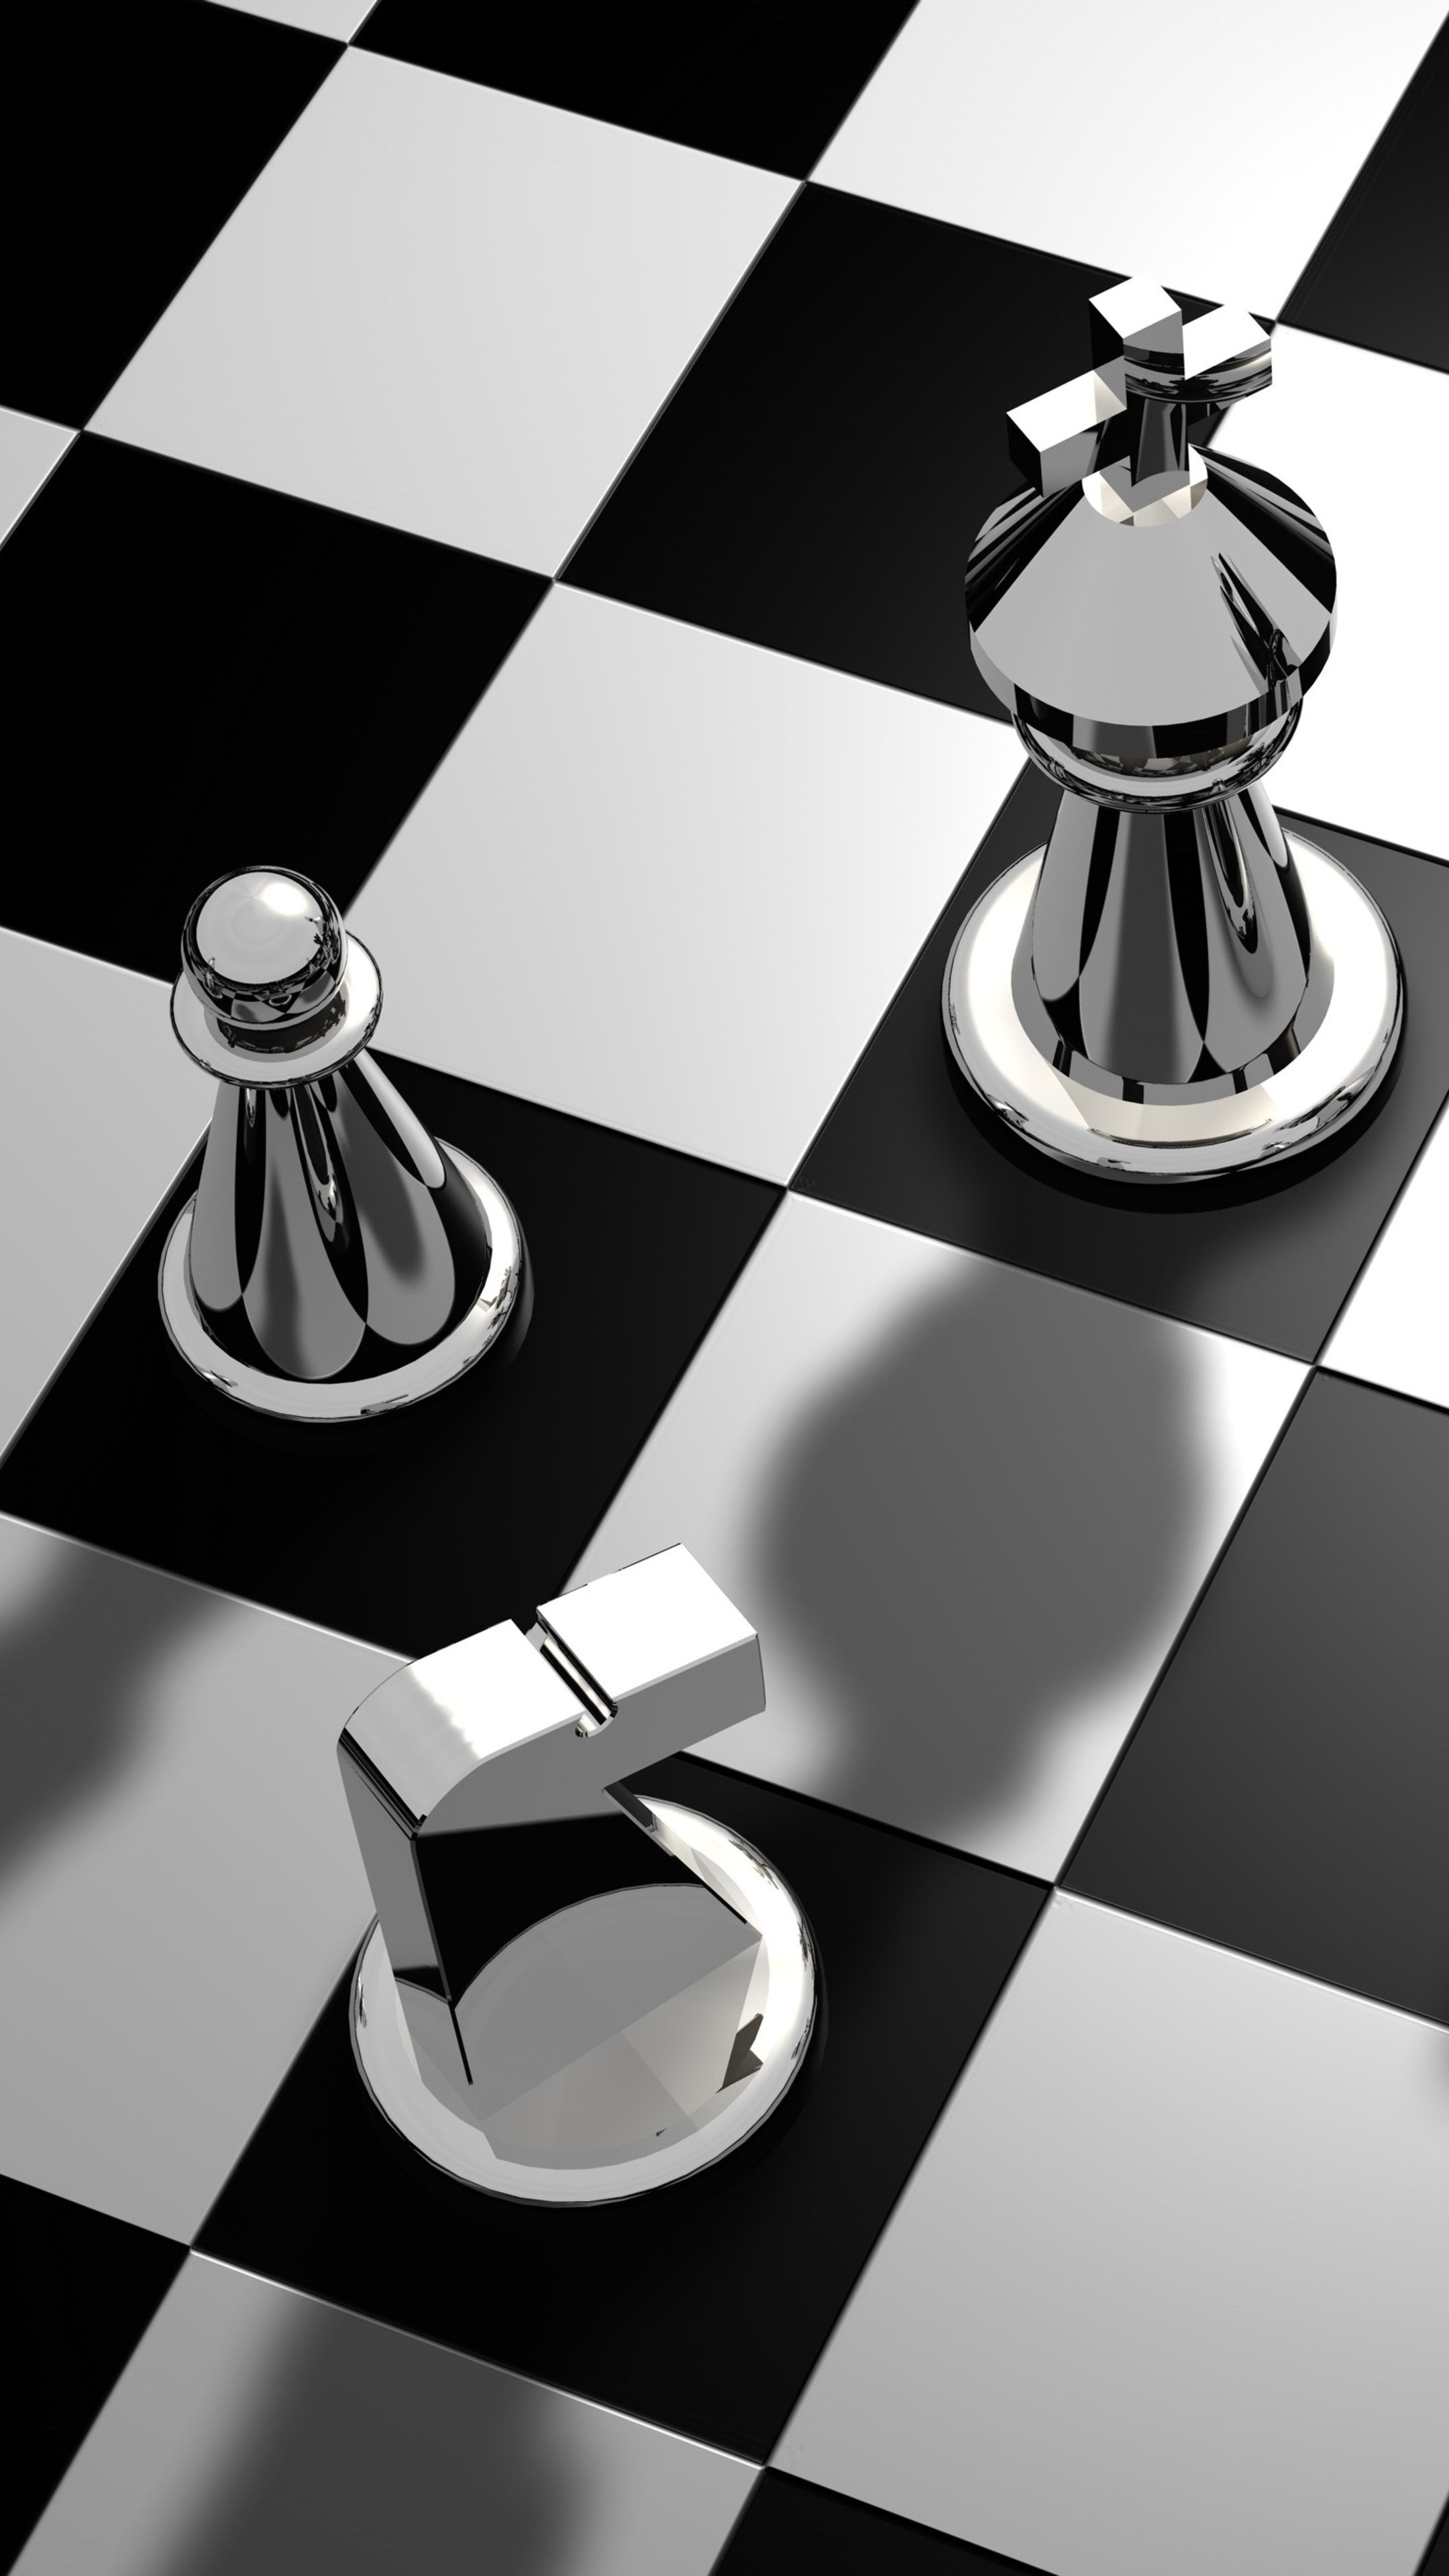 Chess pieces Sony Xperia, HD 4K wallpapers, Backgrounds, Mobile, 2160x3840 4K Handy